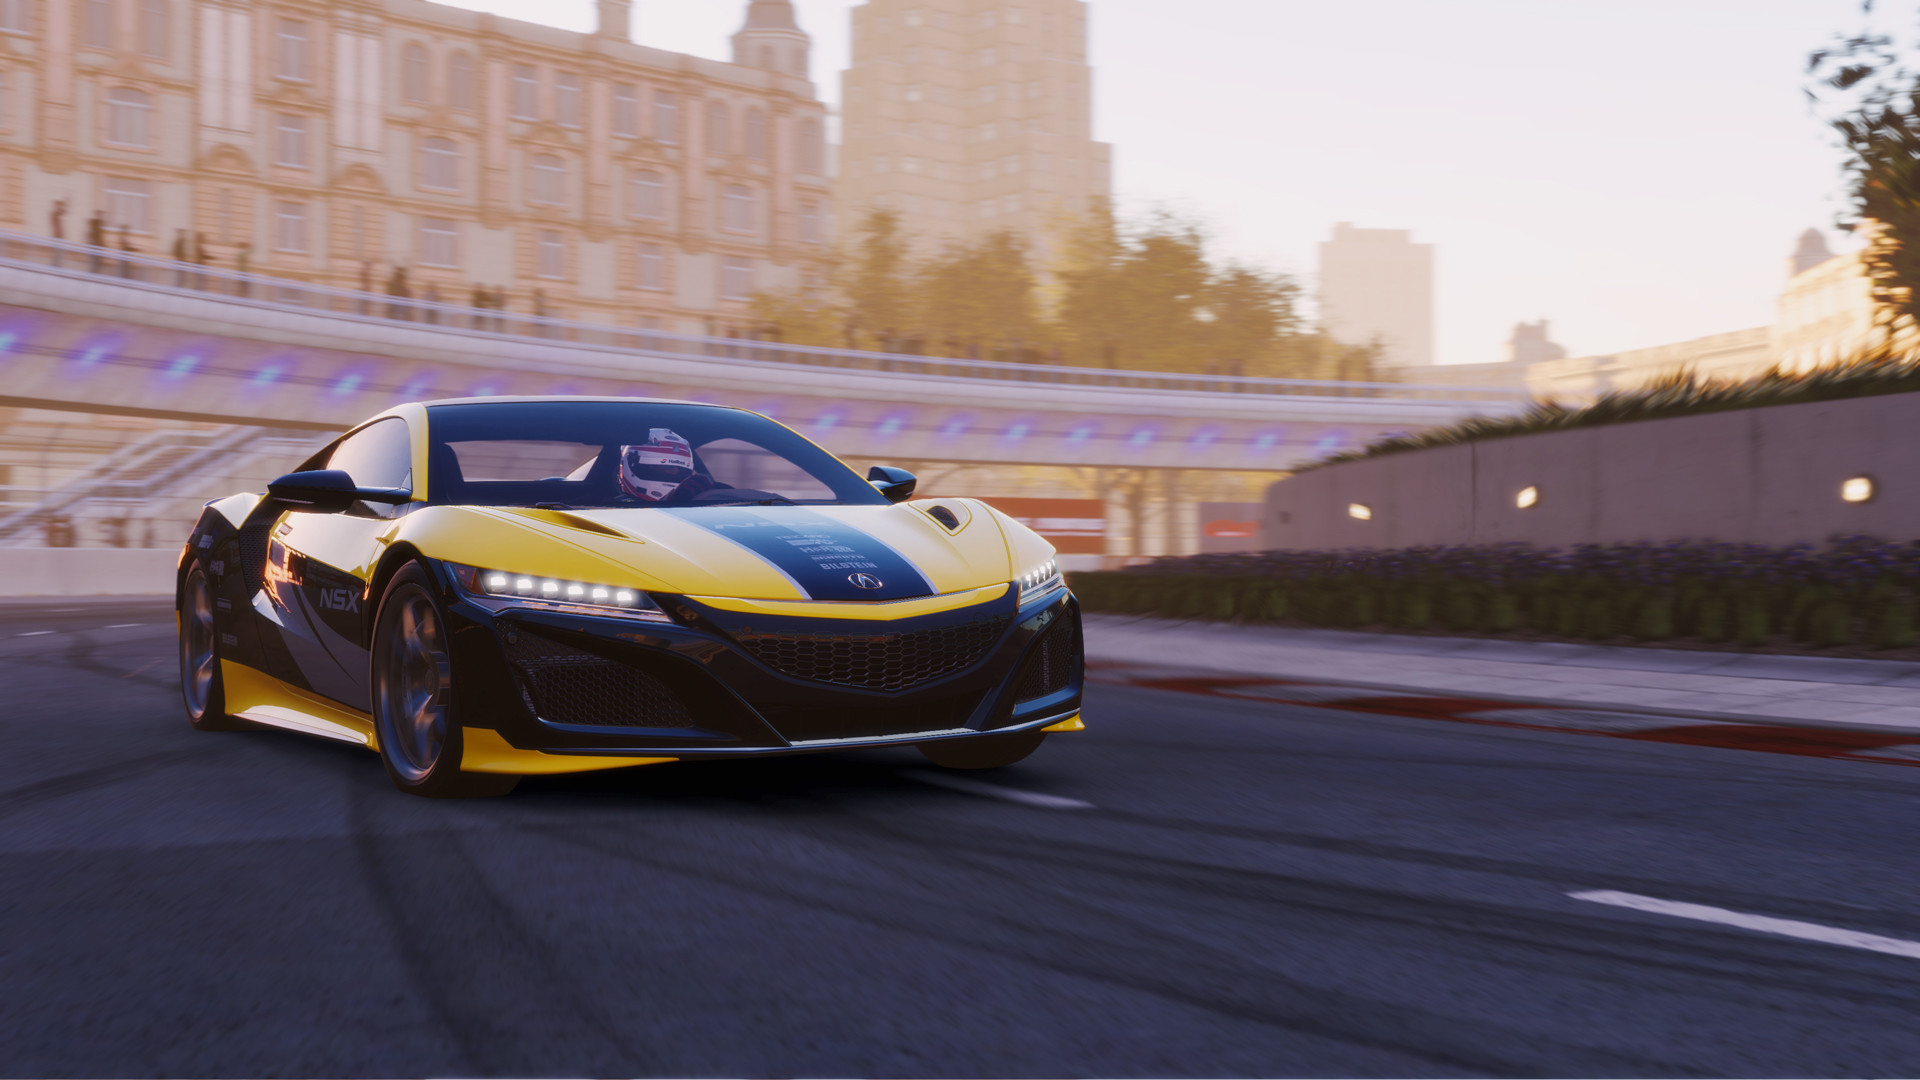 New Project Cars 3 Vehicle Wallpapers